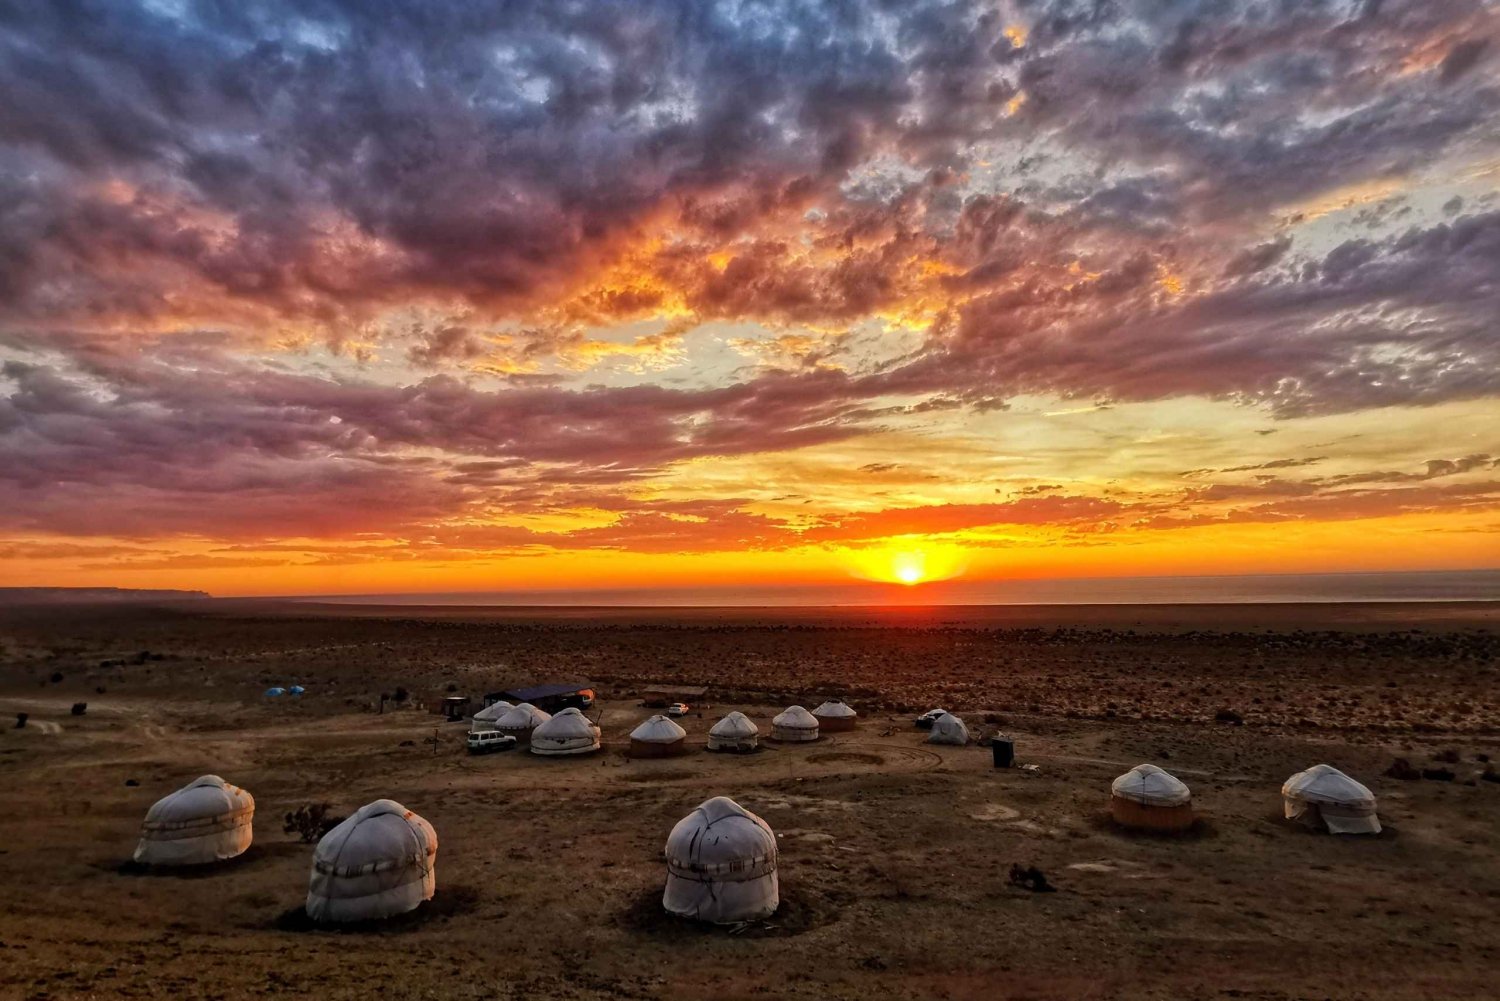 Aral Sea: discovering the environment, culture, traditions